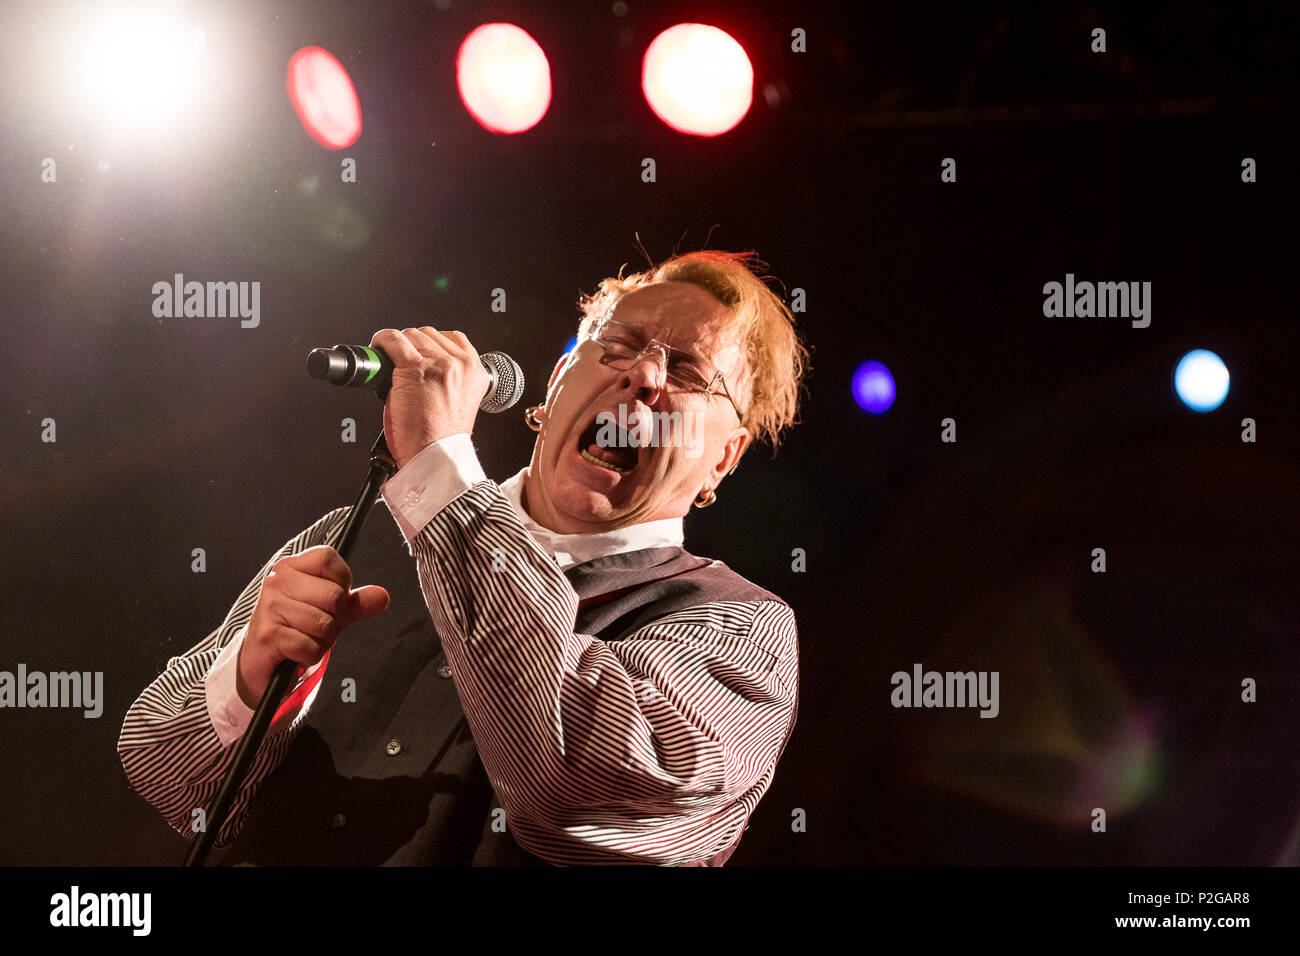 John Lydon (a.k.a. Johnny Rotten) of Public Image Ltd performs live on stage at the O2 Academy in Sheffield, UK, 15th June 2018. Stock Photo